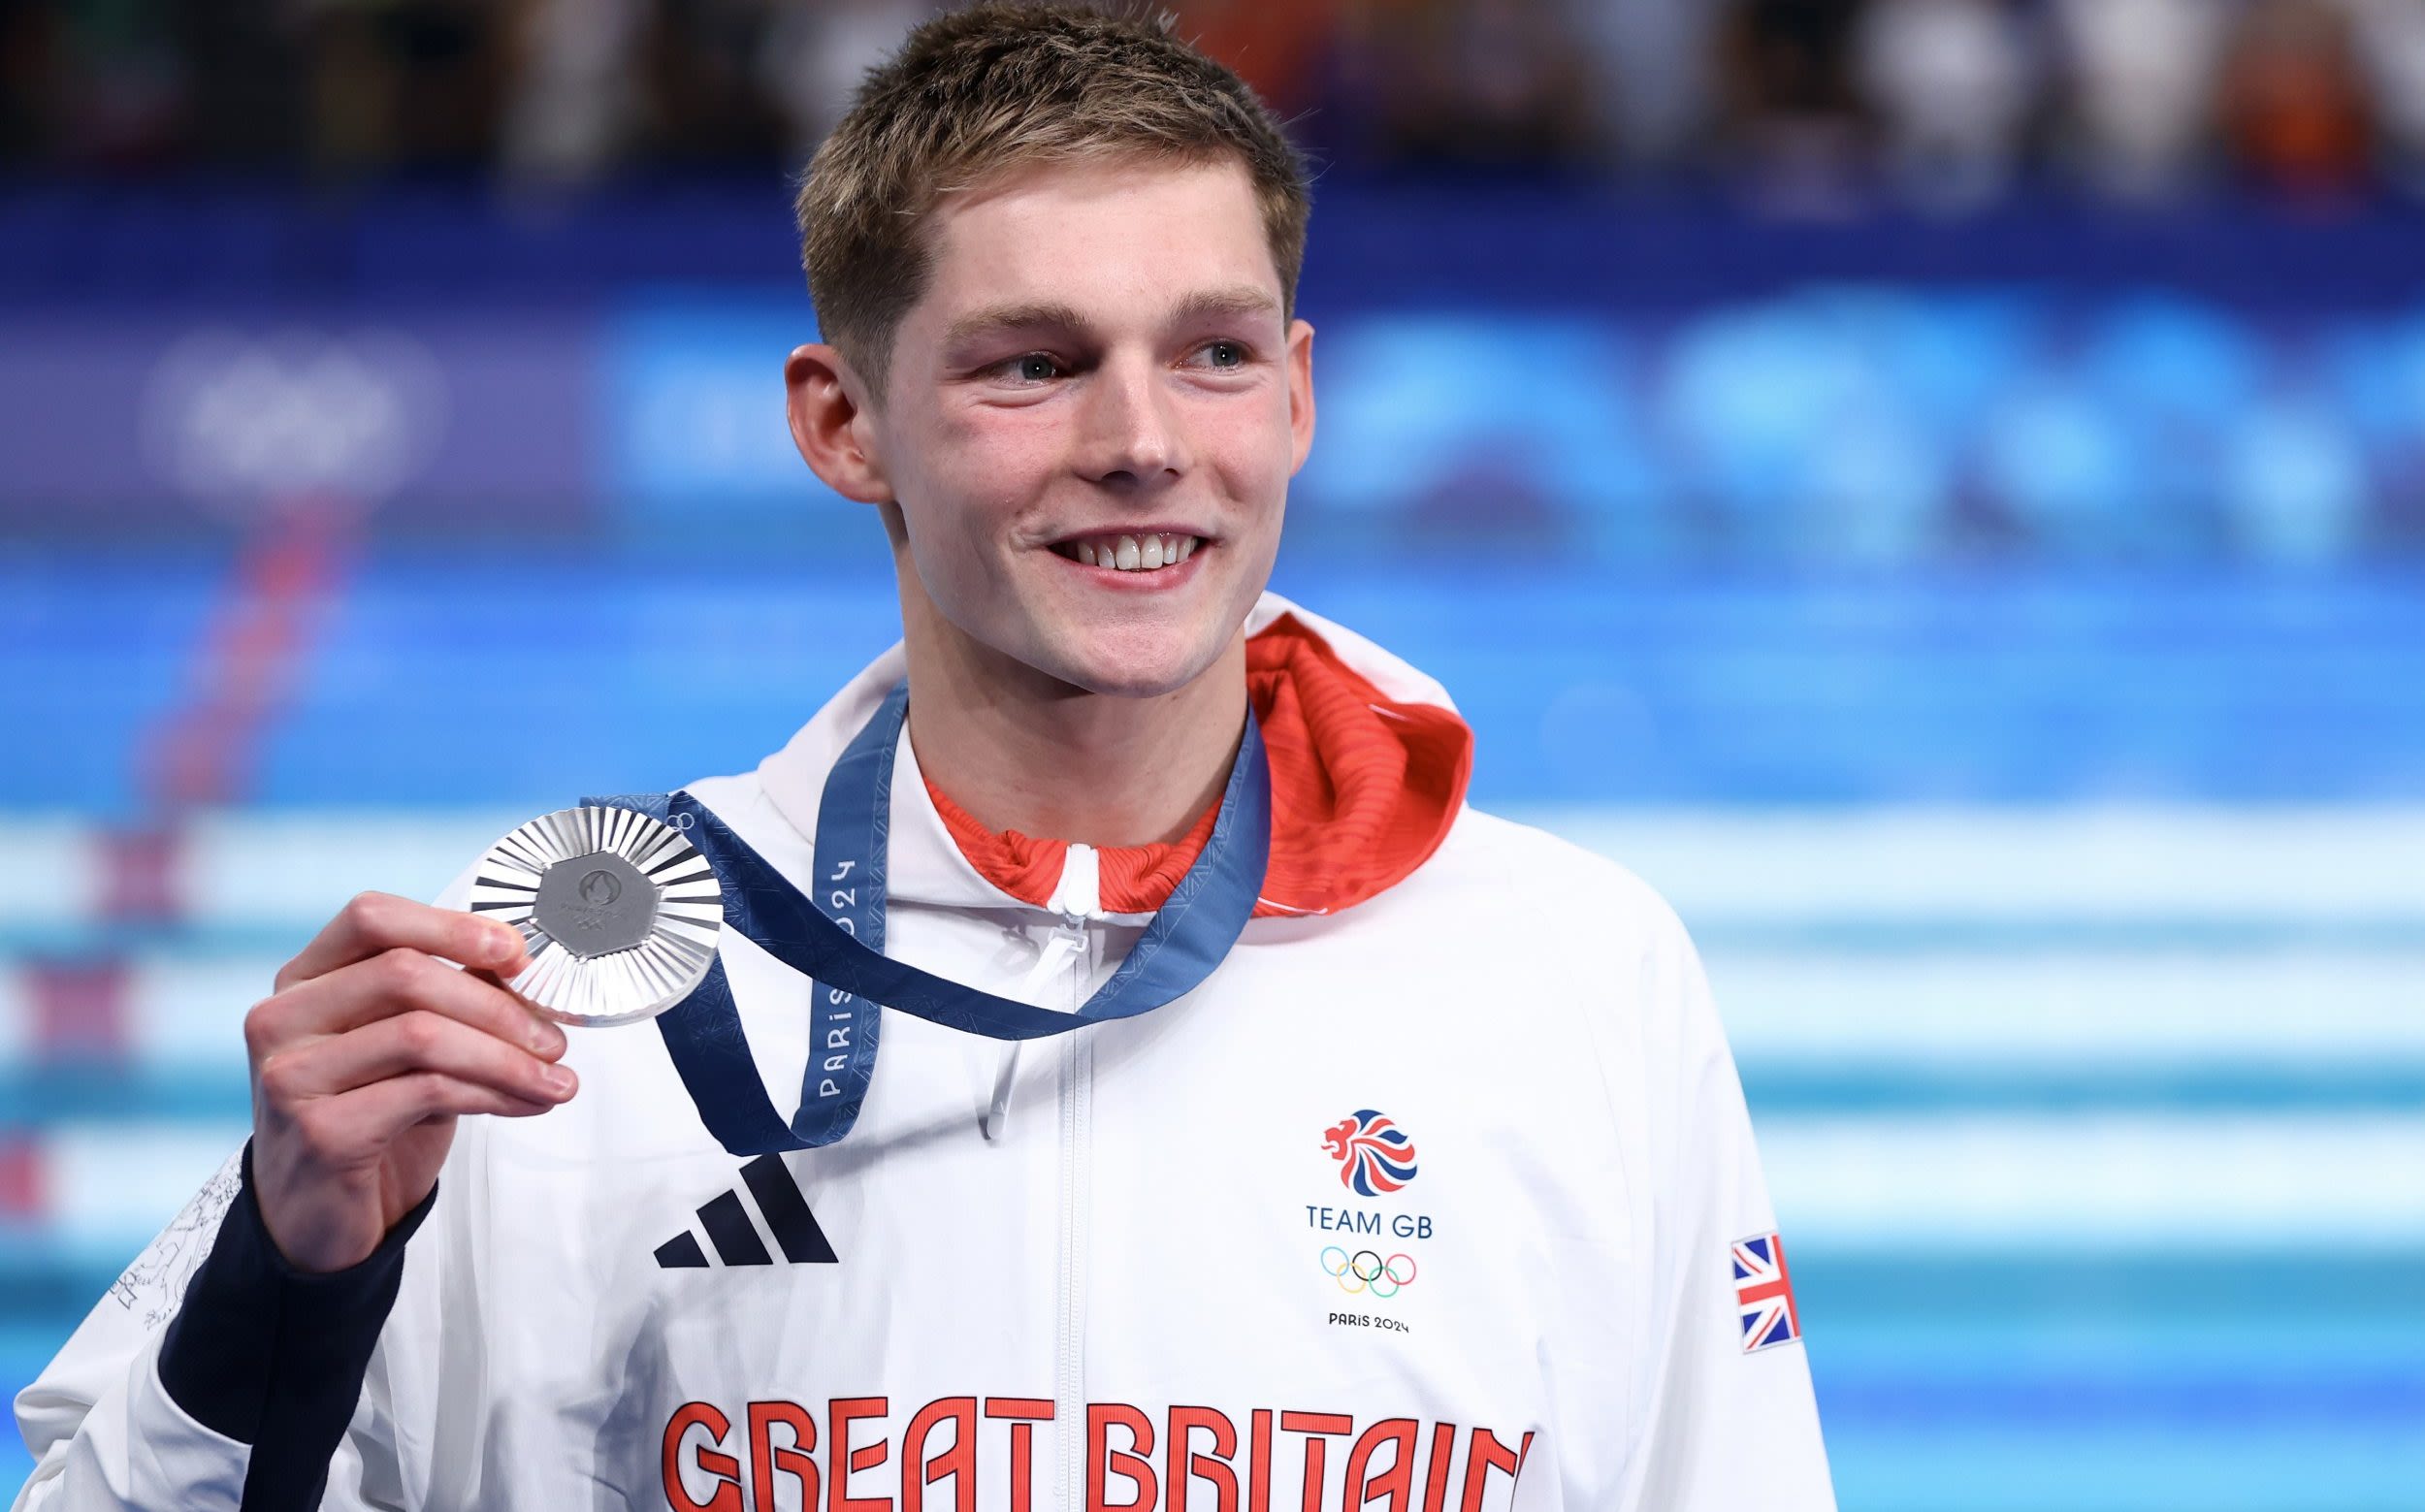 Duncan Scott overtakes Chris Hoy in Britain’s all-time medal list as Ben Proud also takes silver